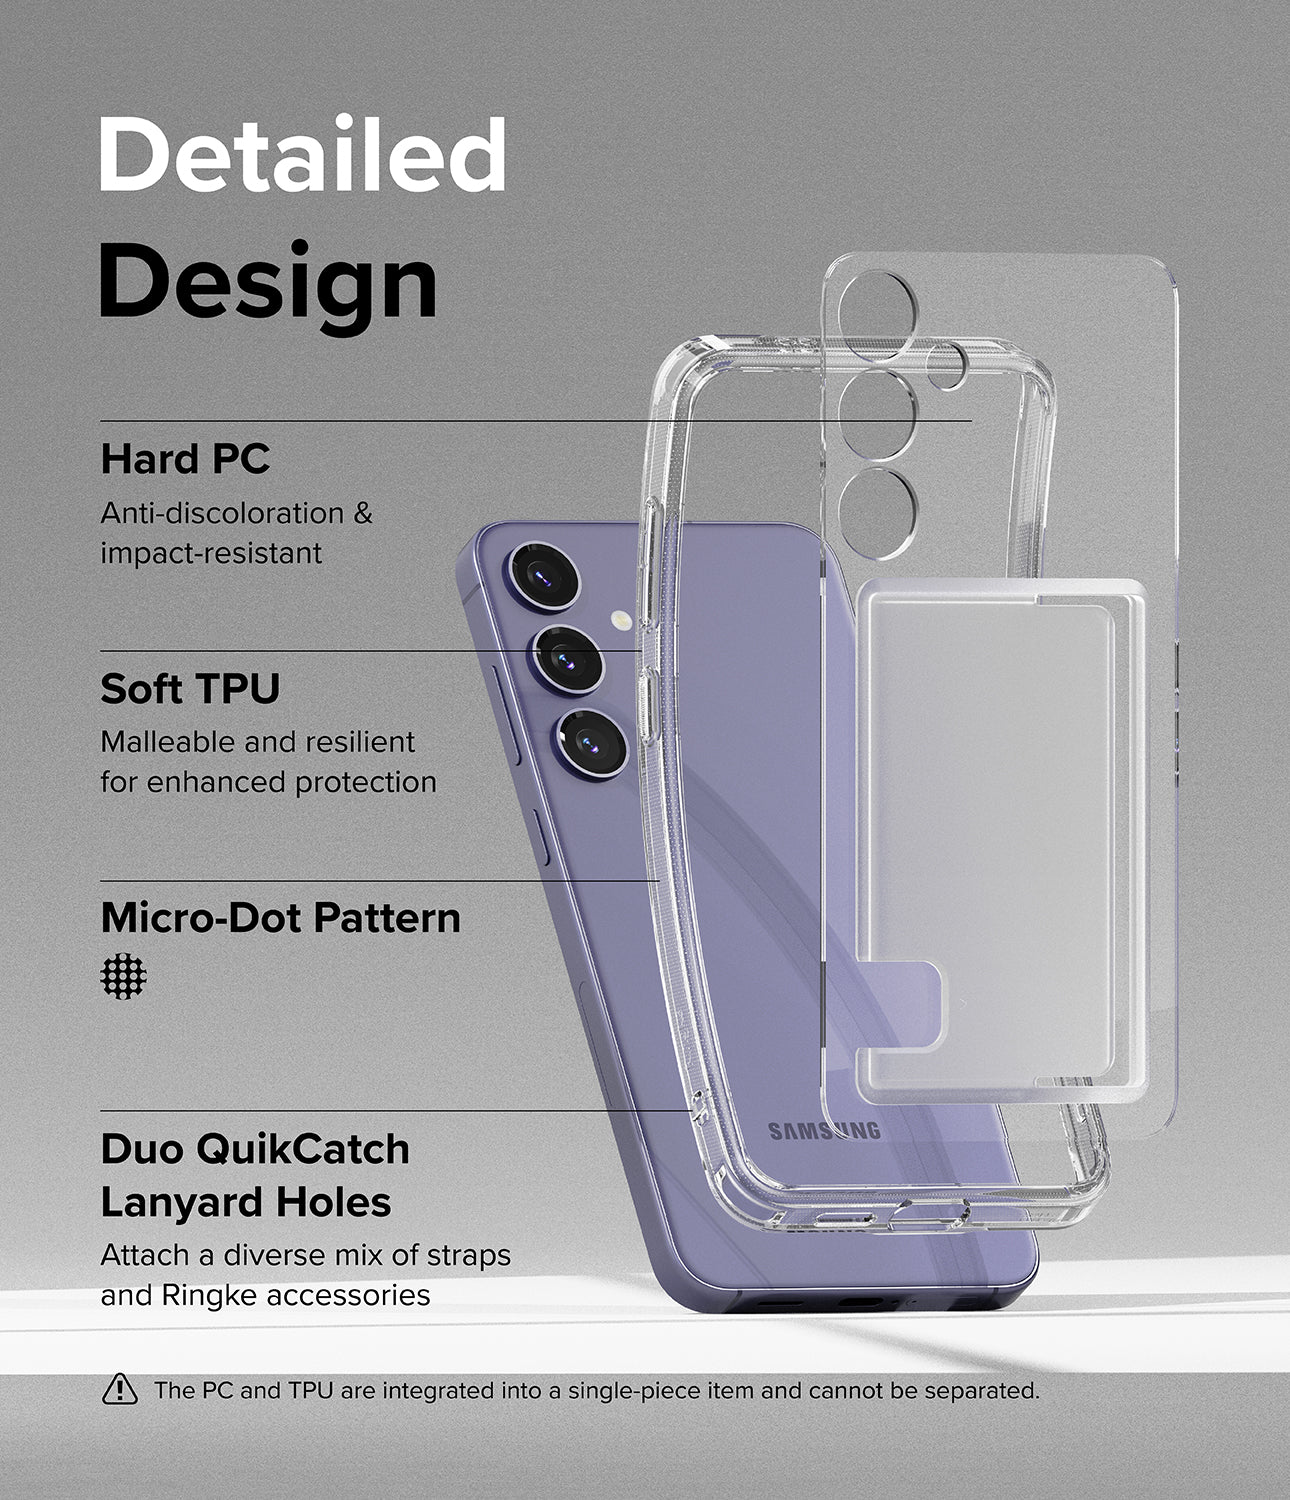 Galaxy S24 Case | Fusion Card - Detailed Design. Anti-discoloration and impact-resistant with Hard PC. Malleable and resilient for enhanced protection with Soft TPU. Micro-Dot Pattern. Duo QuikCatch Lanyard Holes to attach a diverse mix of straps and Ringke accessories.